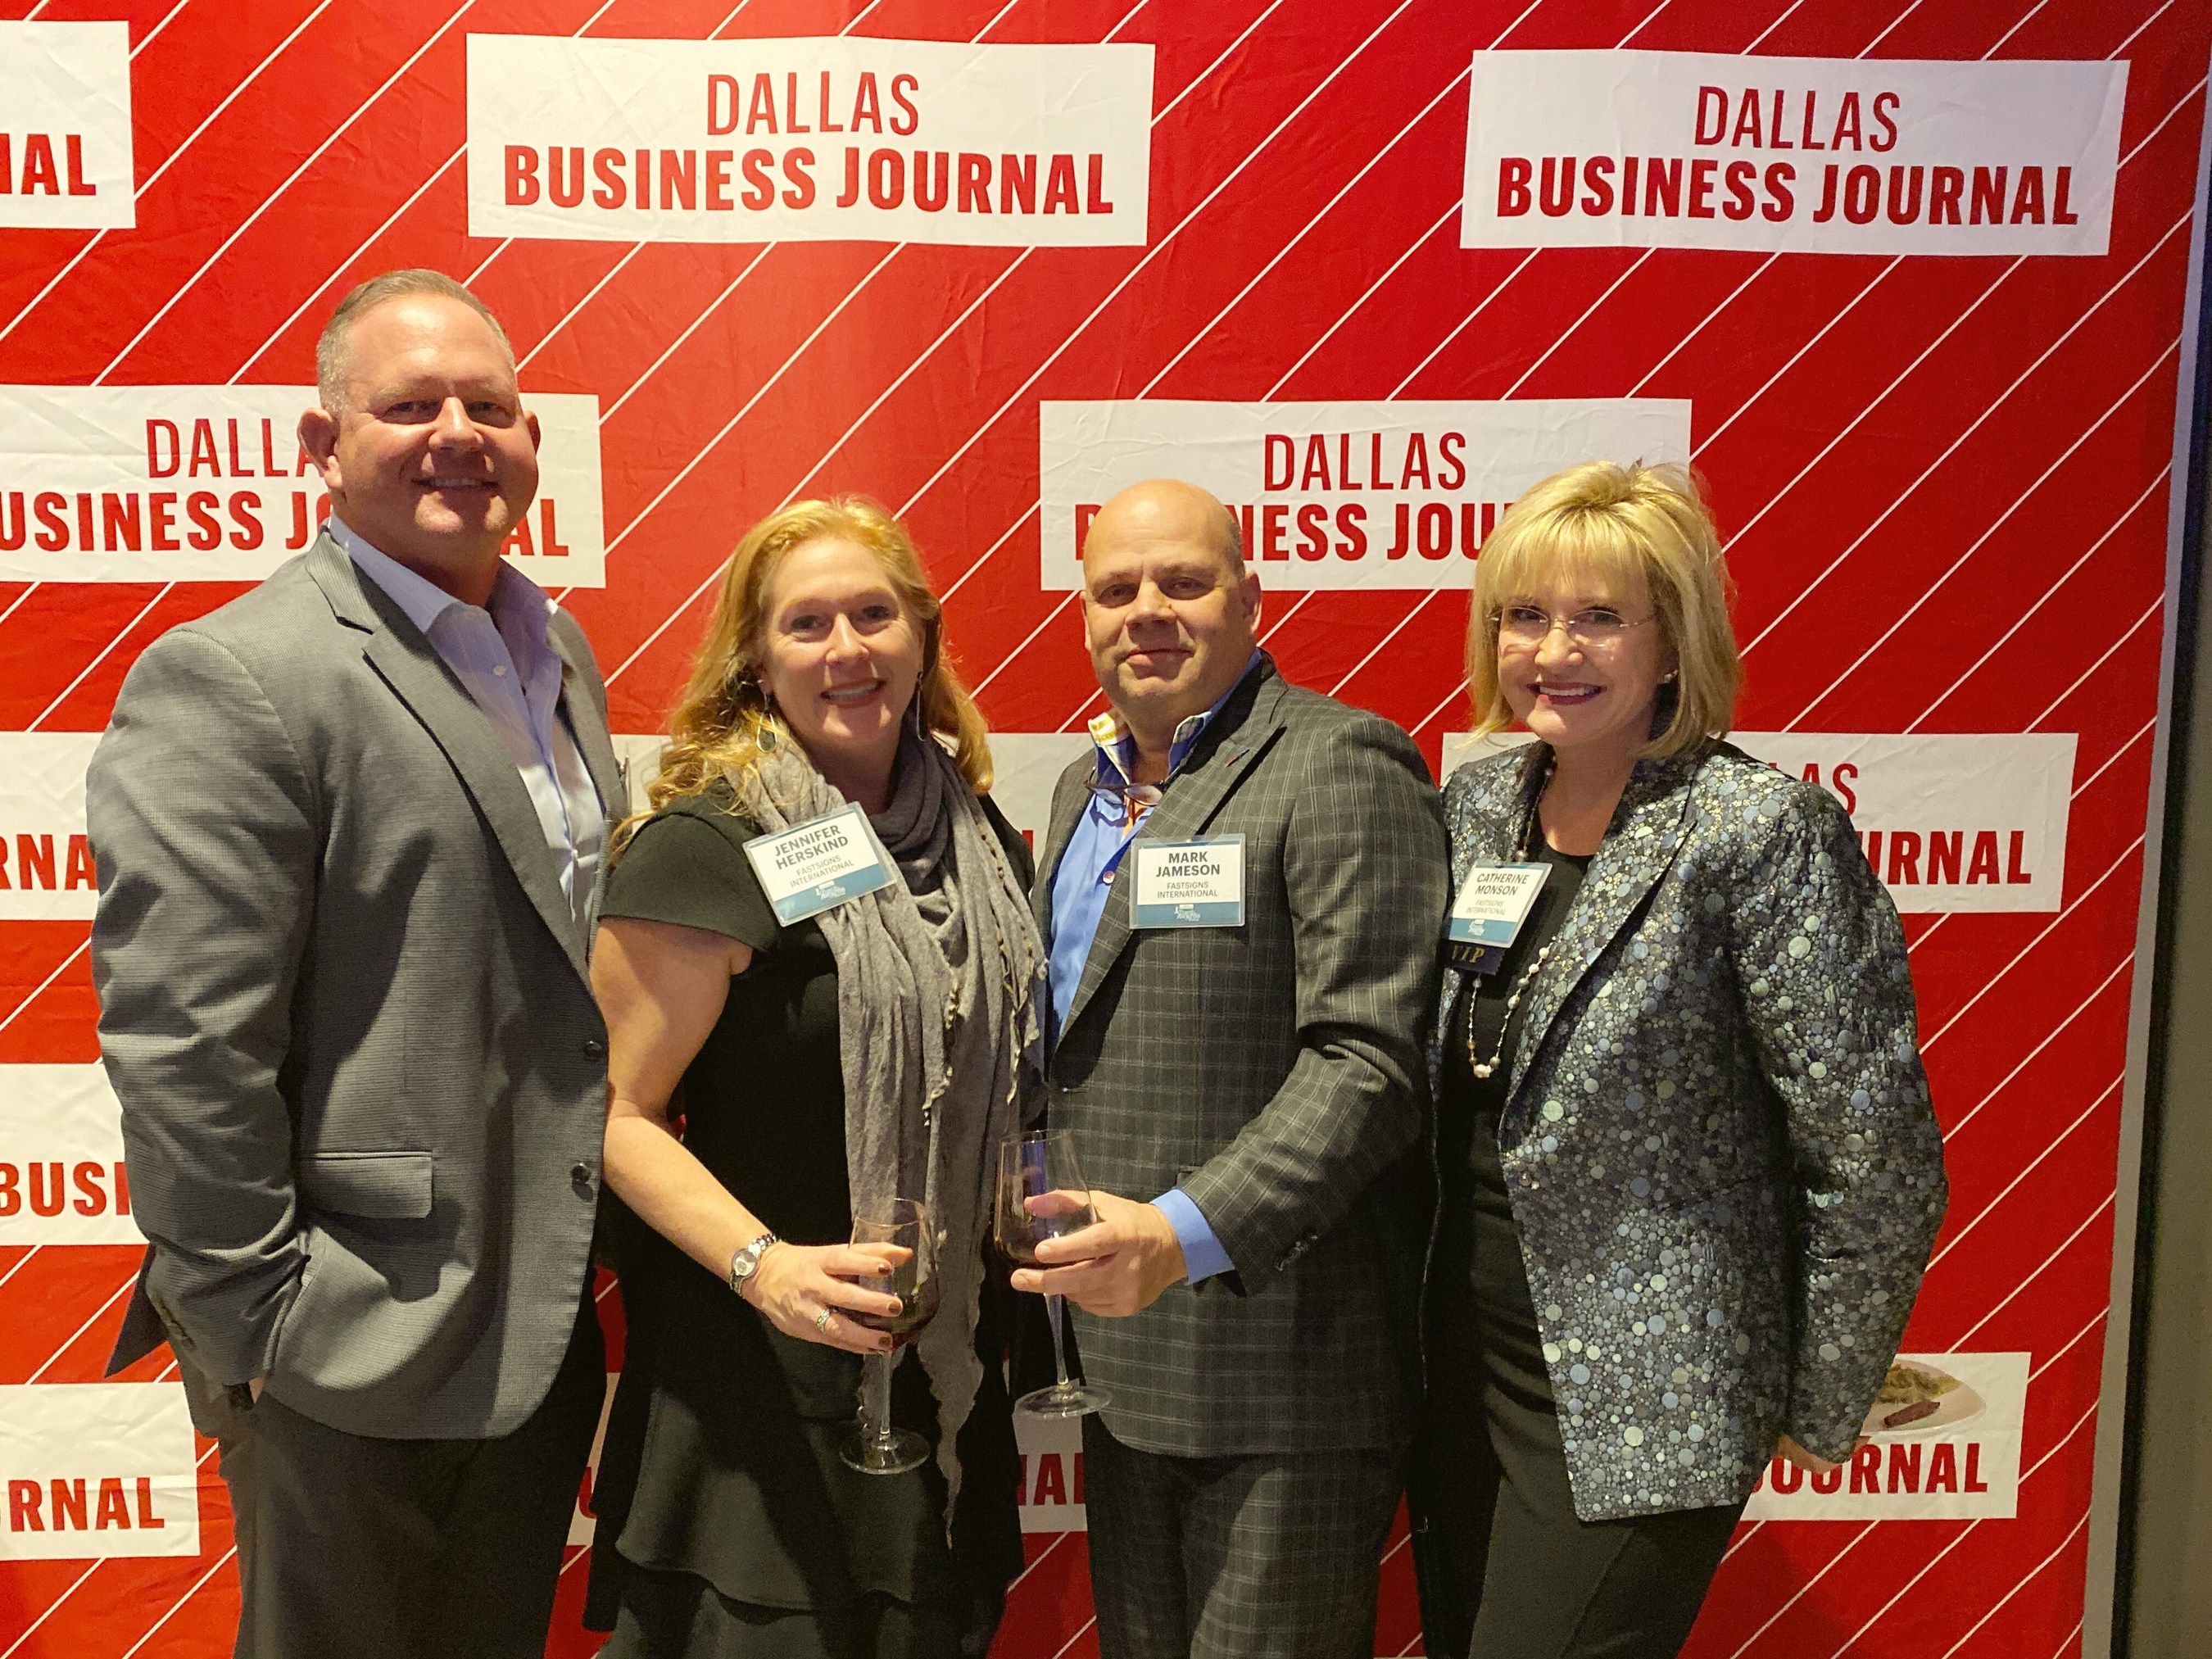 FASTSIGNS International Named a Finalist in Torch Awards for Ethics by Dallas Business Journal